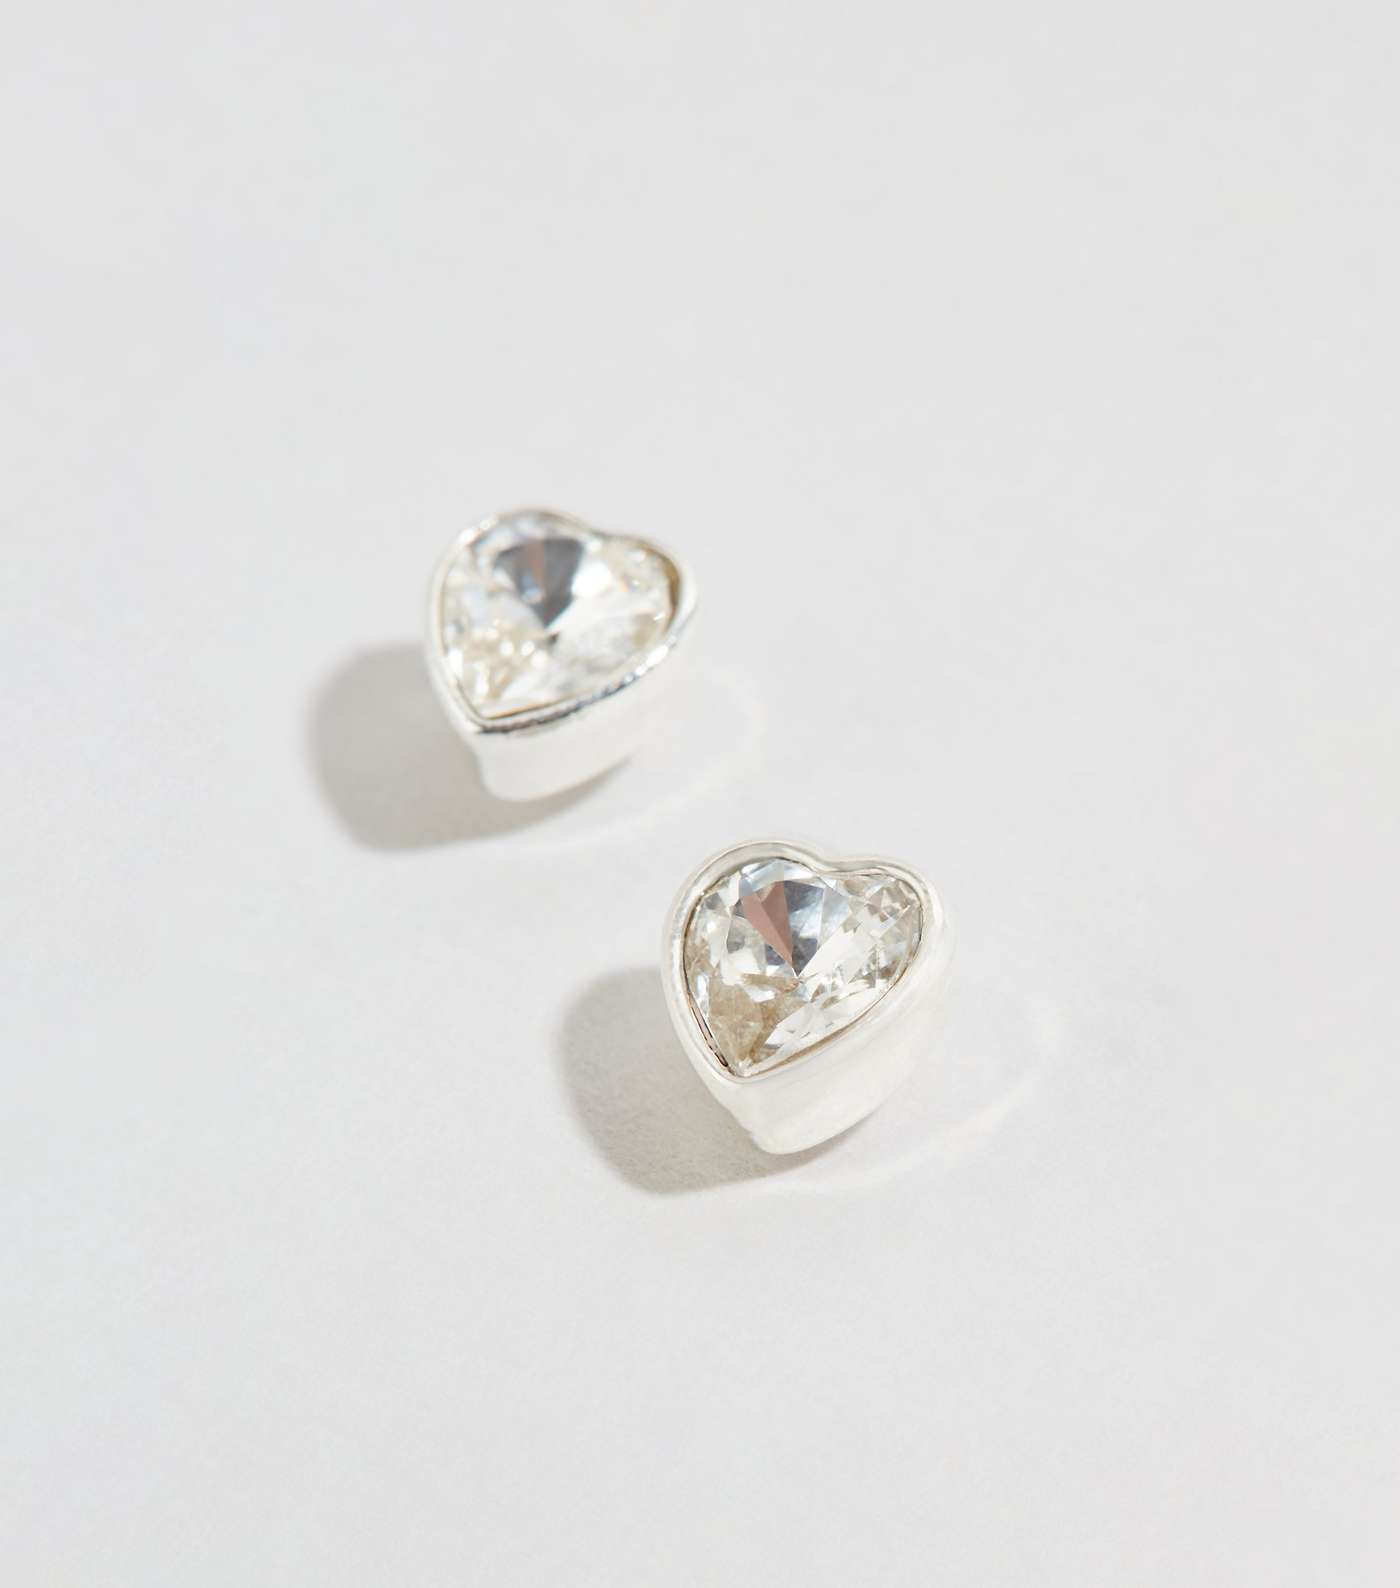 Silver Plated Heart Earrings with Crystals from Swarovski® Image 3